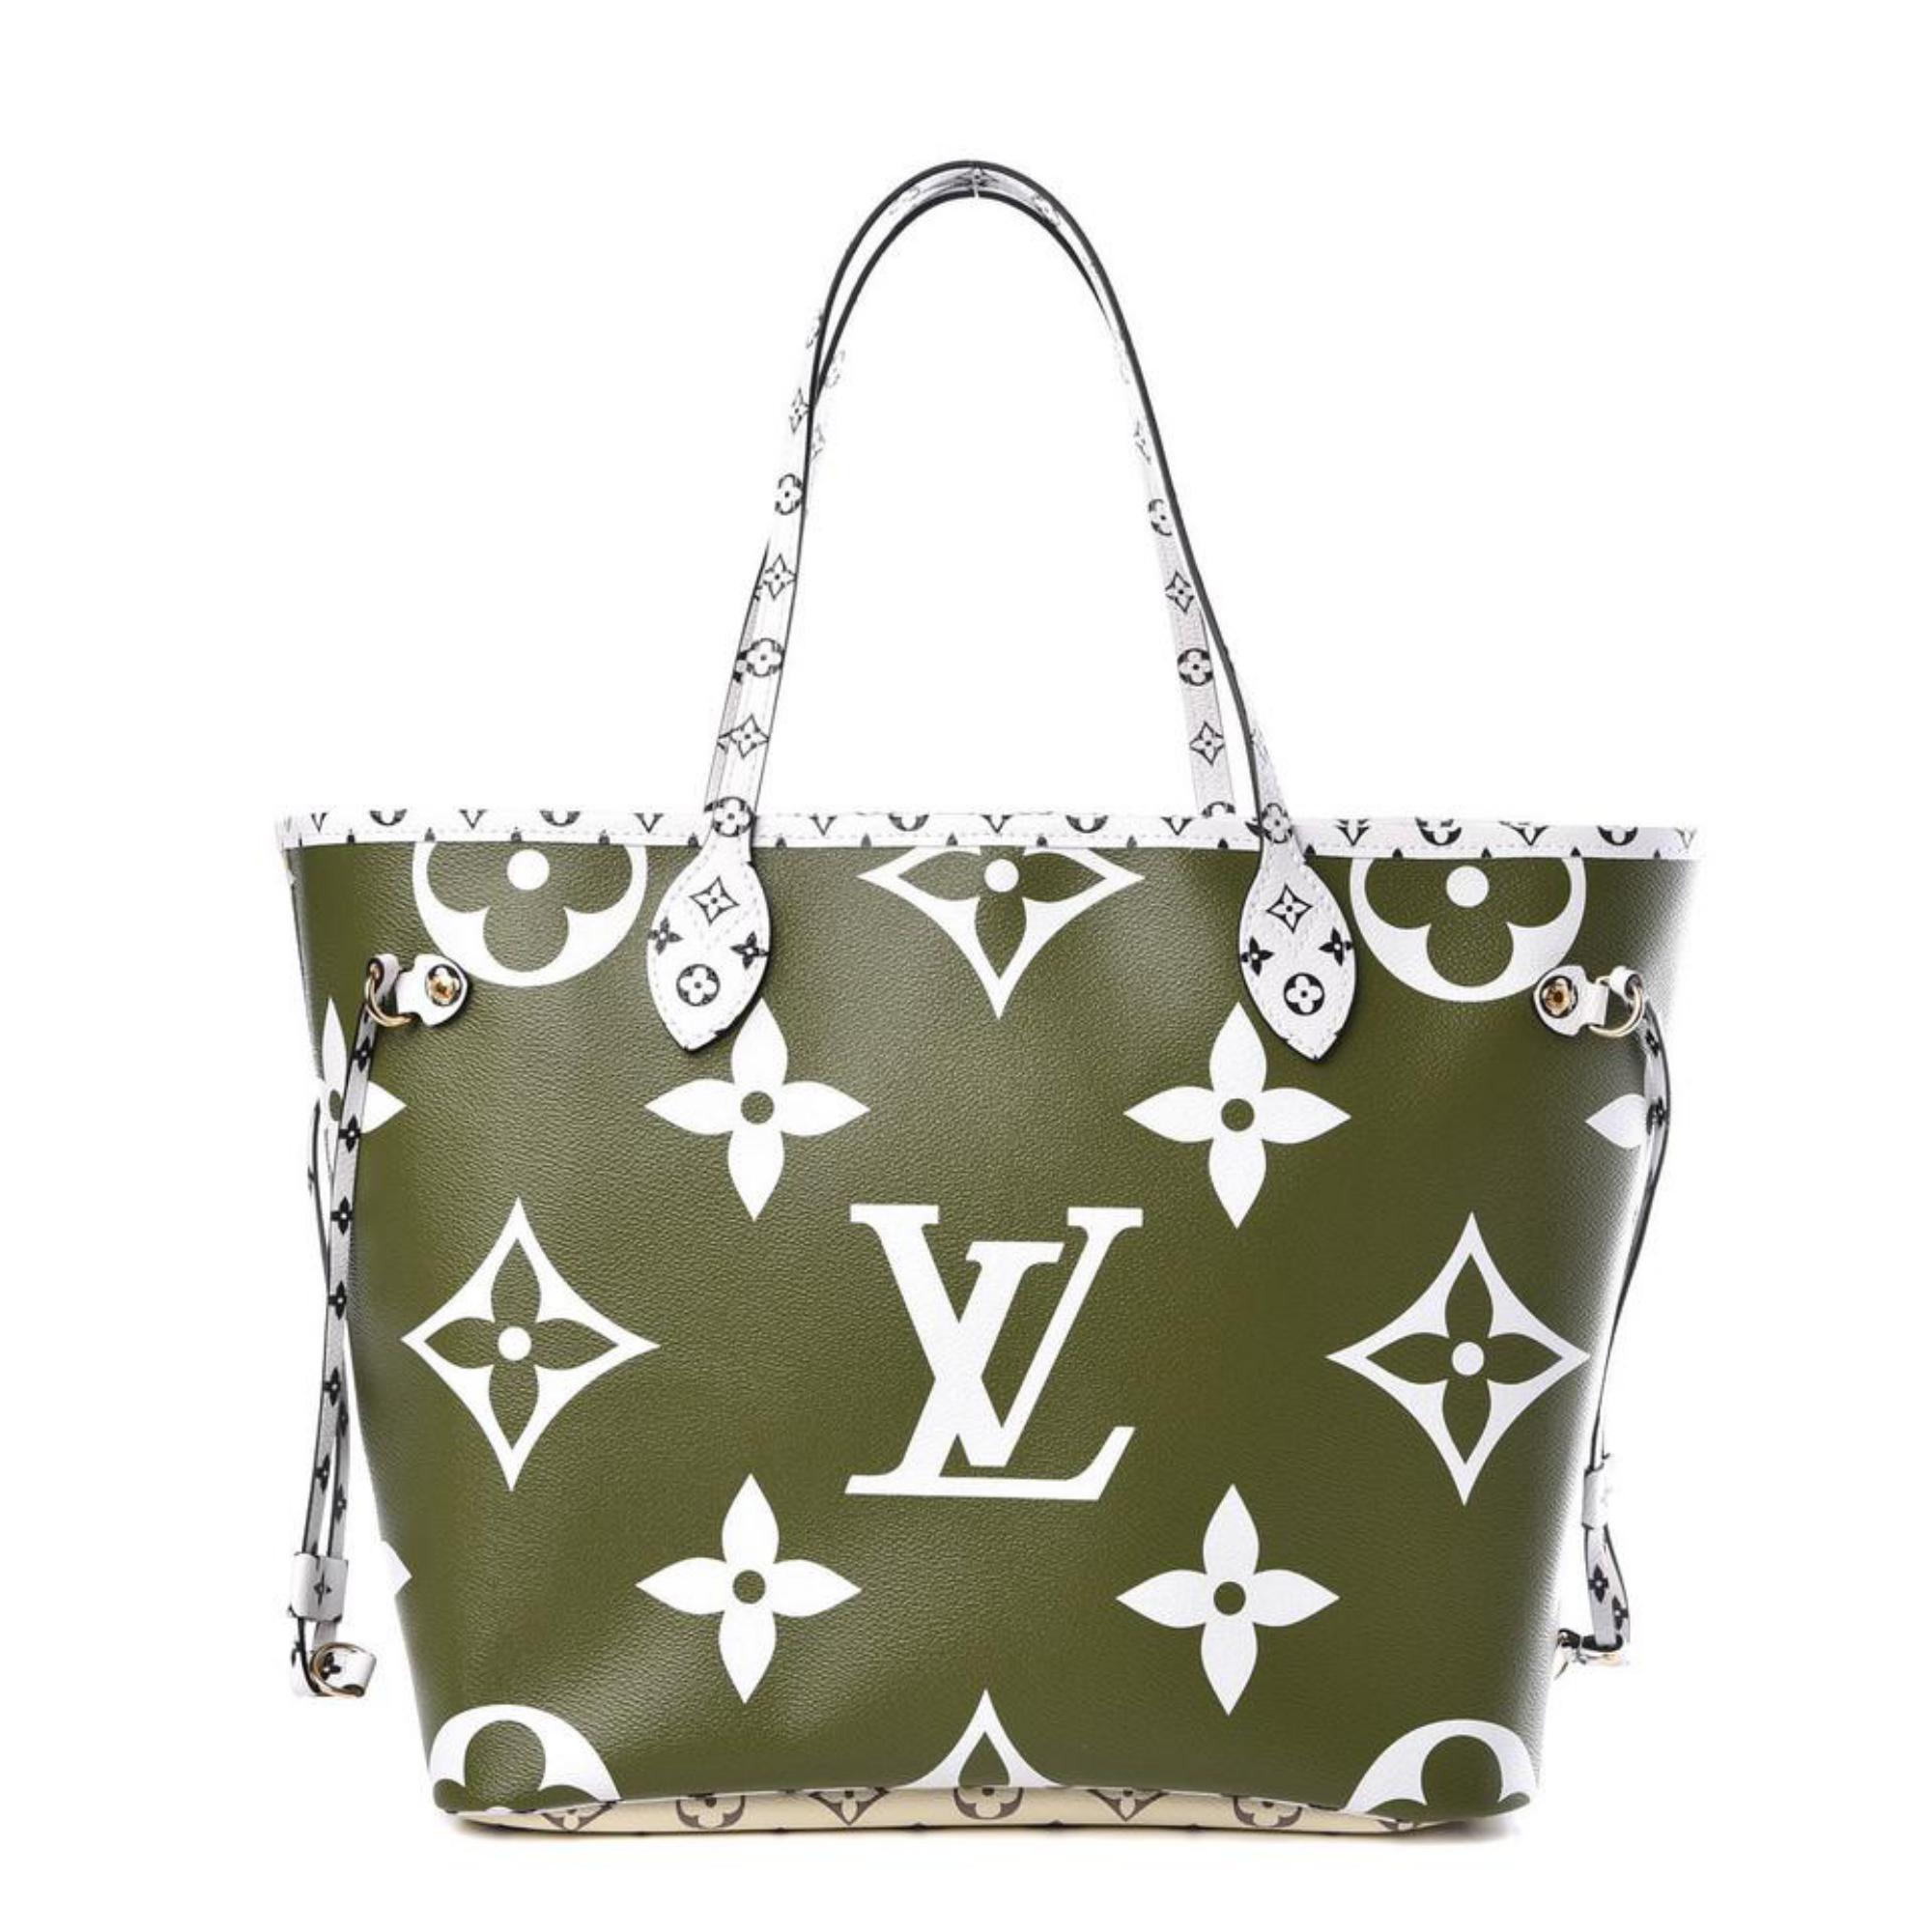 Louis Vuitton Limited Beige x Khaki Green Monogram Giant Neverfull MM Tote s27lv7
Date Code/Serial Number: AR1109
Made In: France
Measurements: Length:  18.5